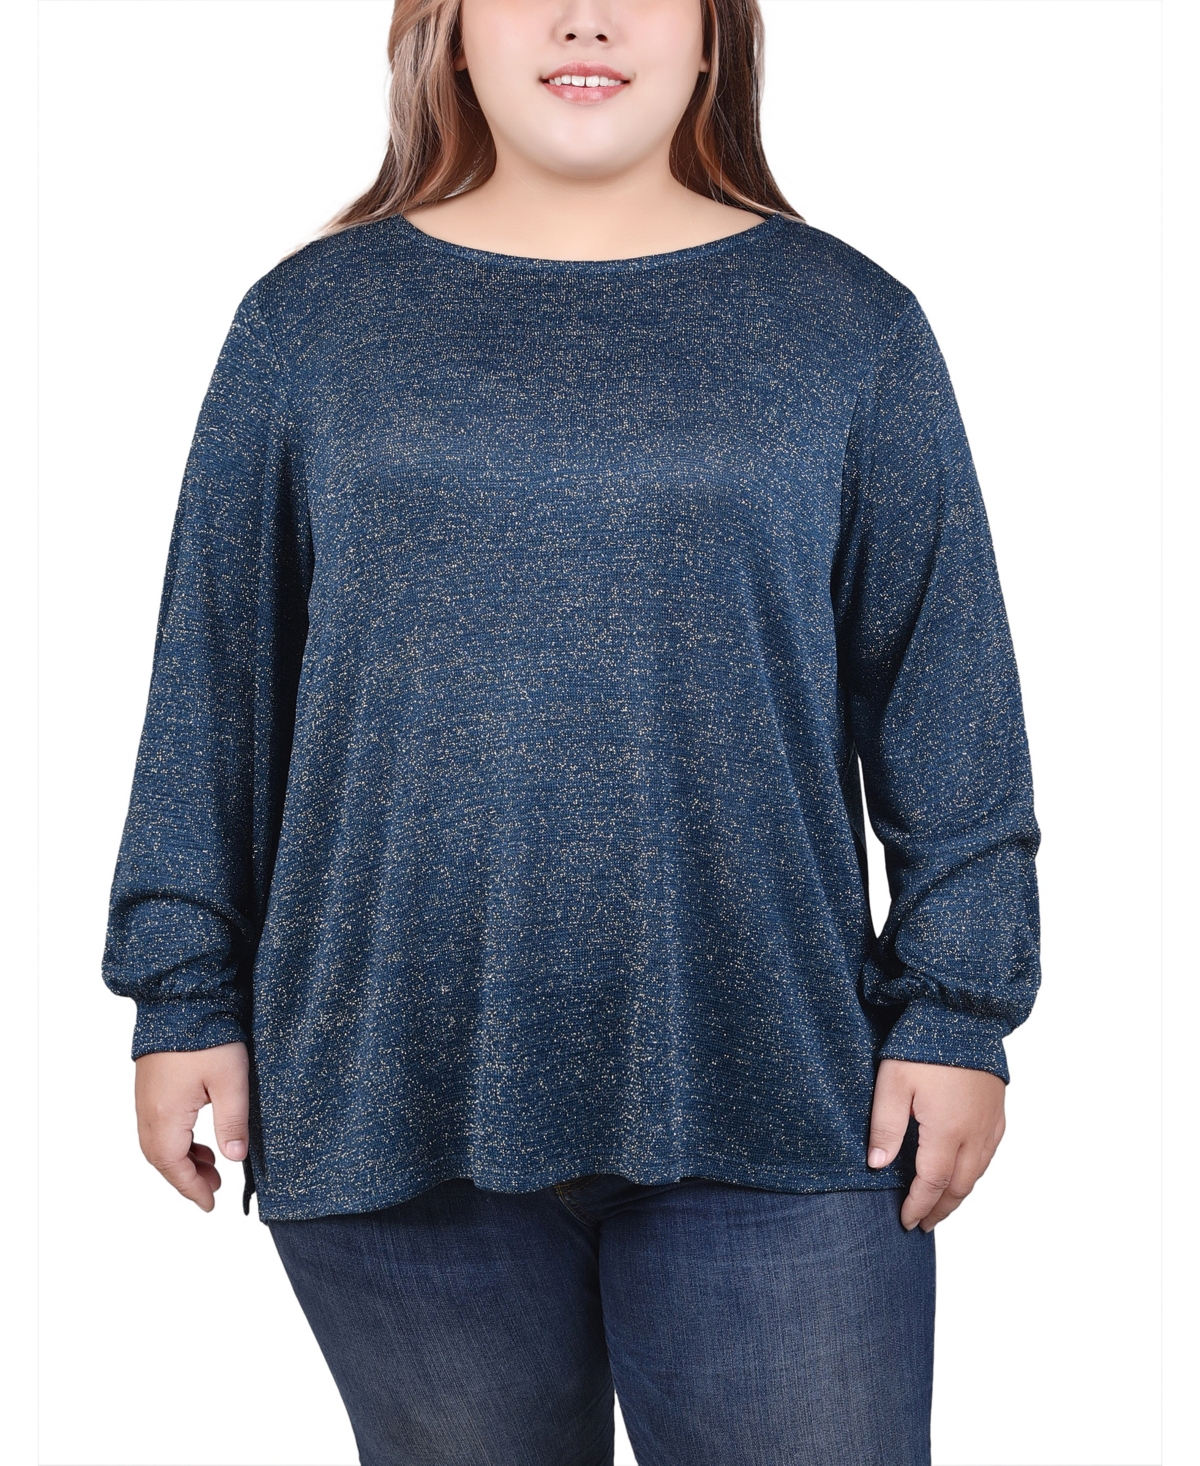 NY COLLECTION PLUS SIZE LONG SLEEVE TUNIC TOP